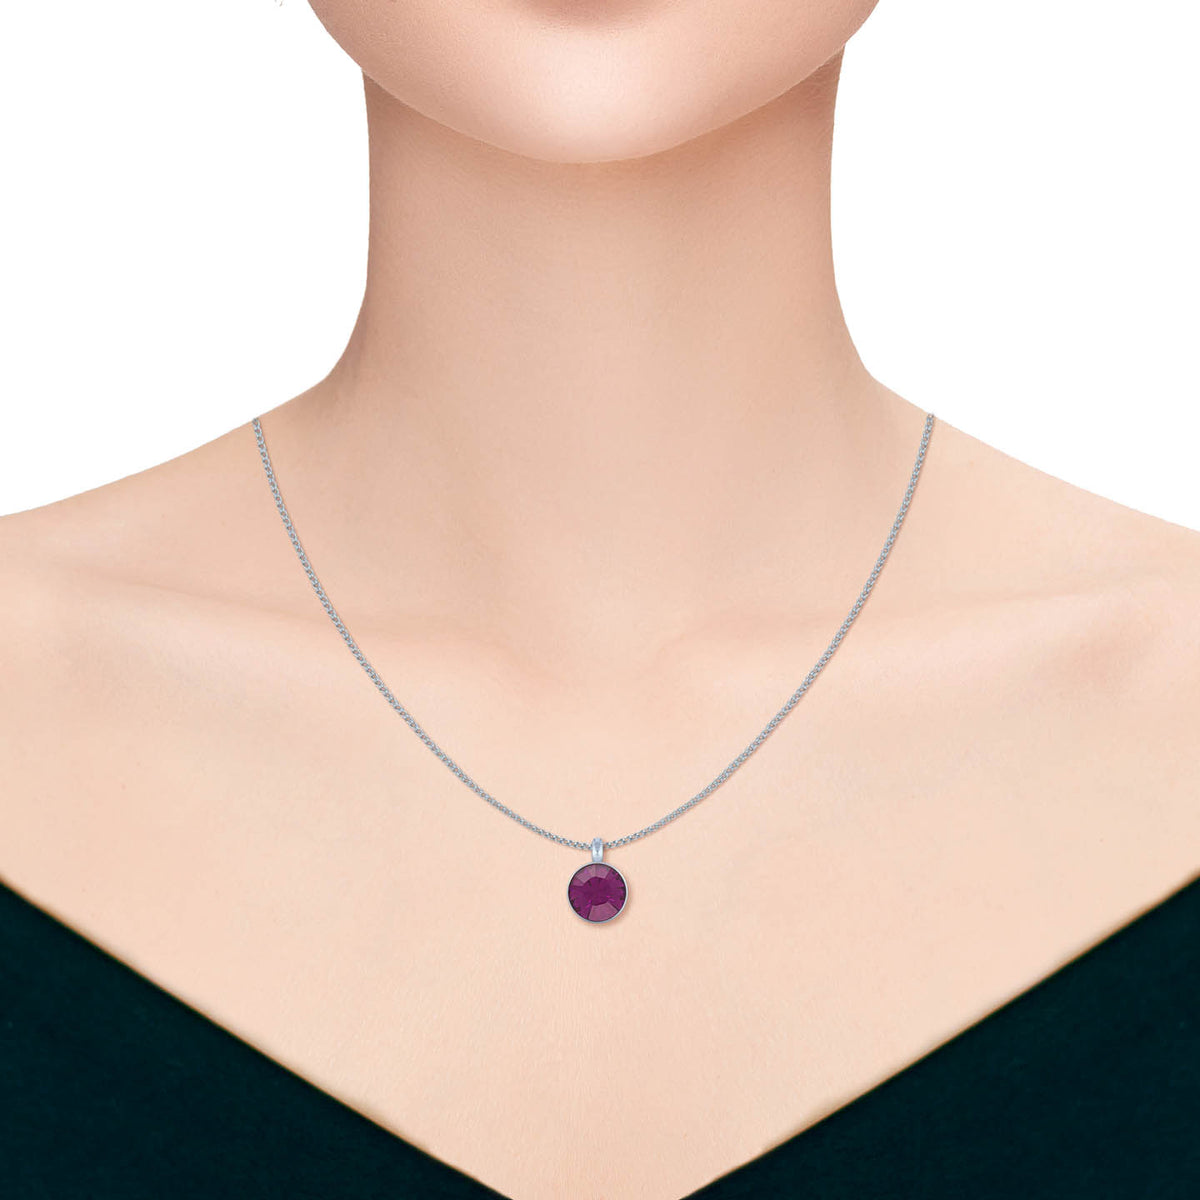 Bella Pendant Necklace with Purple Amethyst Round Crystals from Swarovski Silver Toned Rhodium Plated - Ed Heart